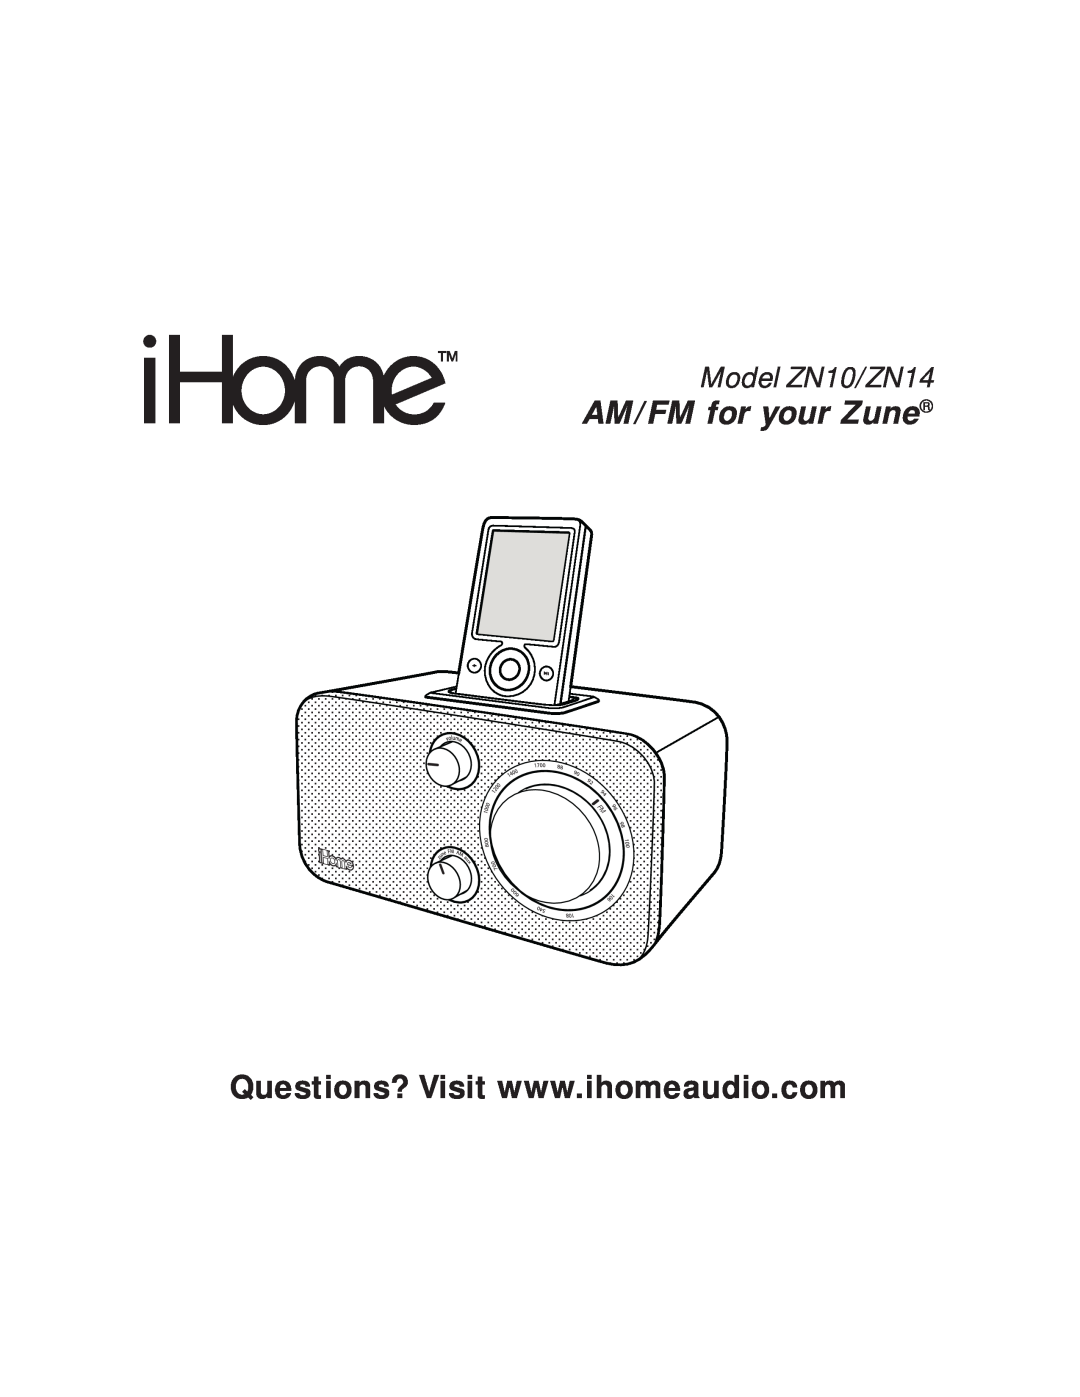 iHome manual AM/FM for your Zune, Model ZN10/ZN14 